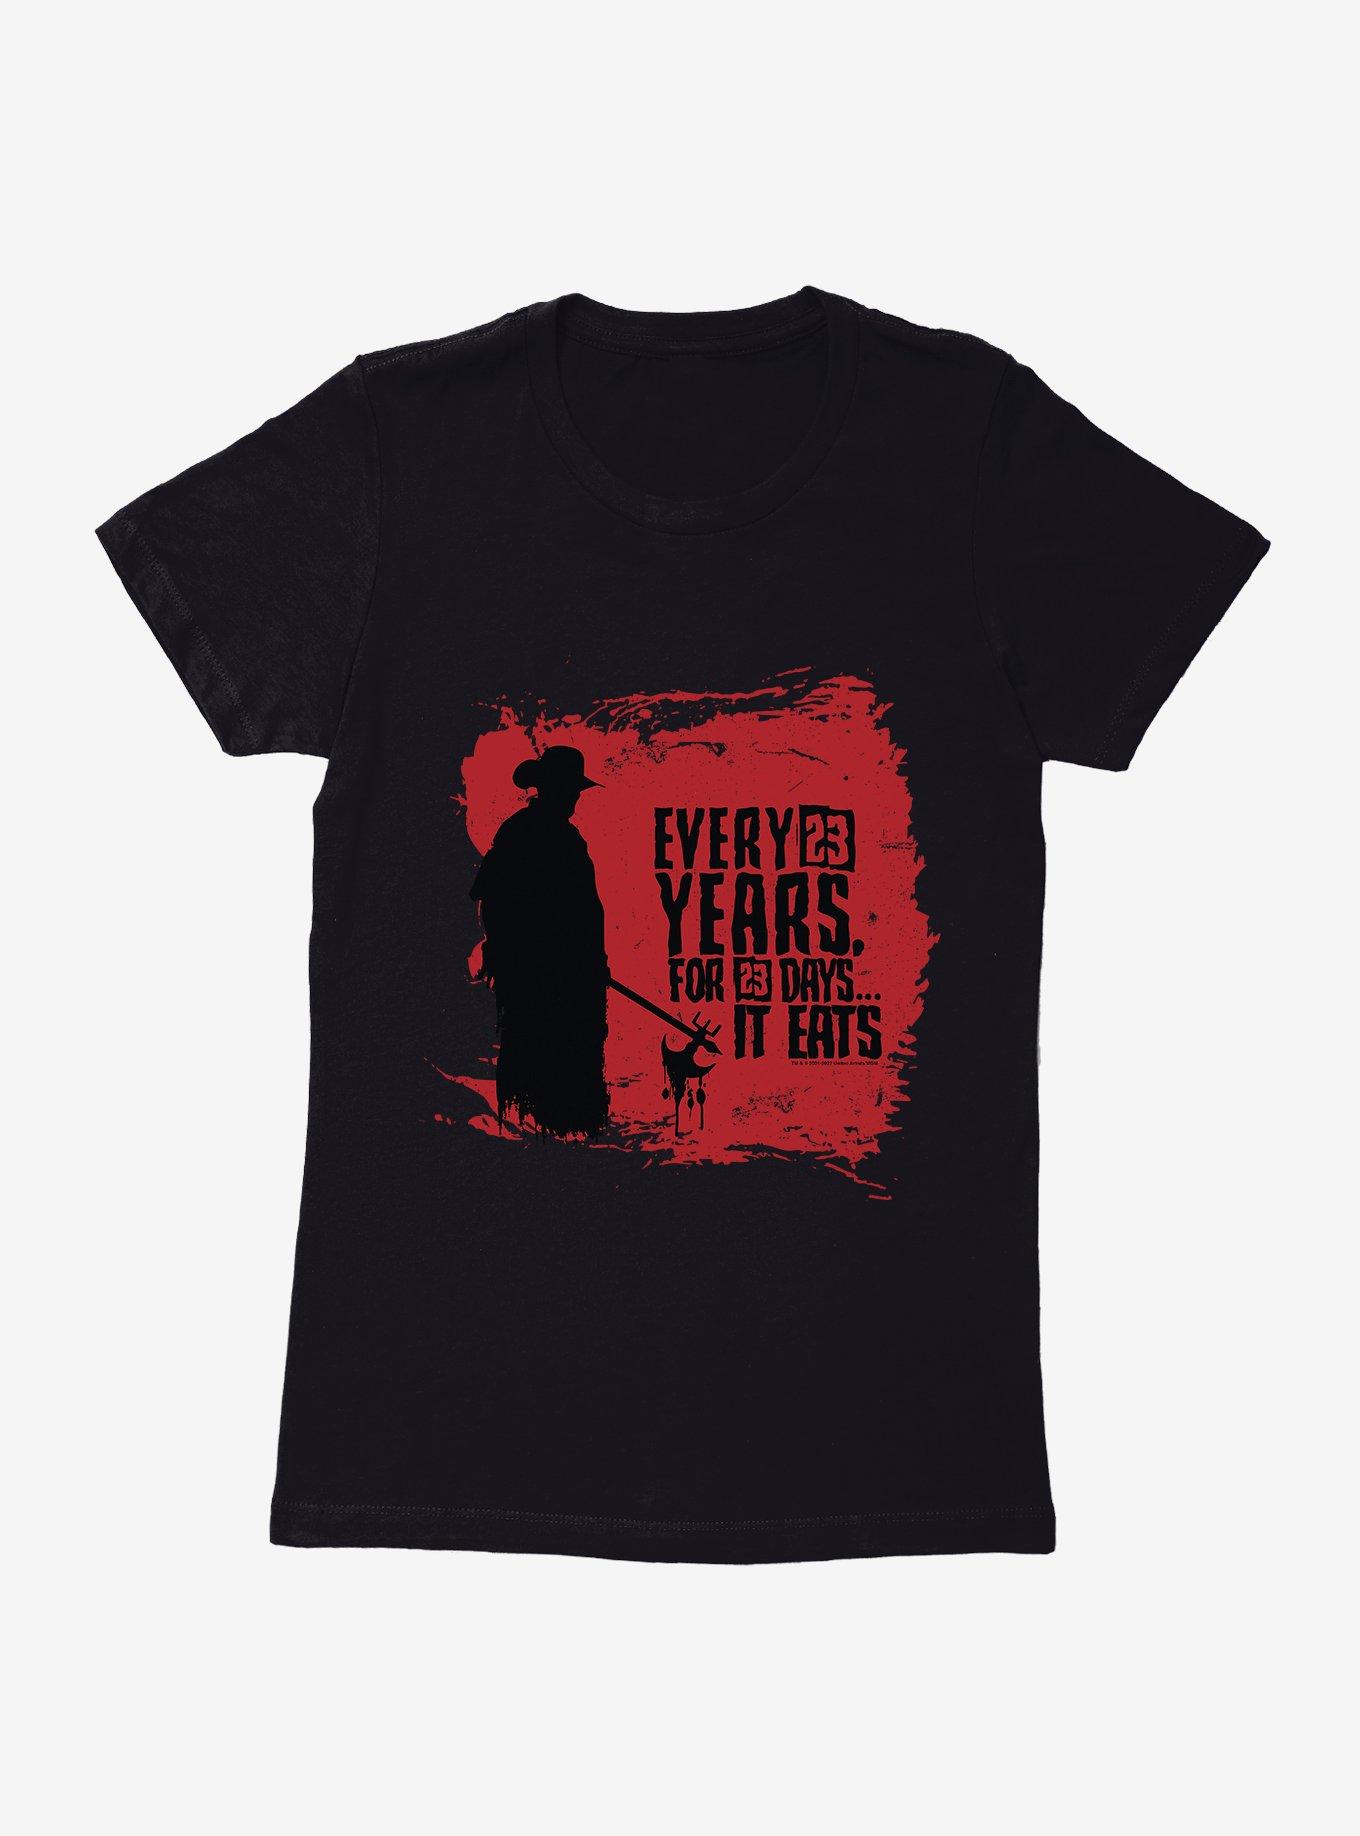 Jeepers Creepers It Eats Womens T-Shirt, BLACK, hi-res